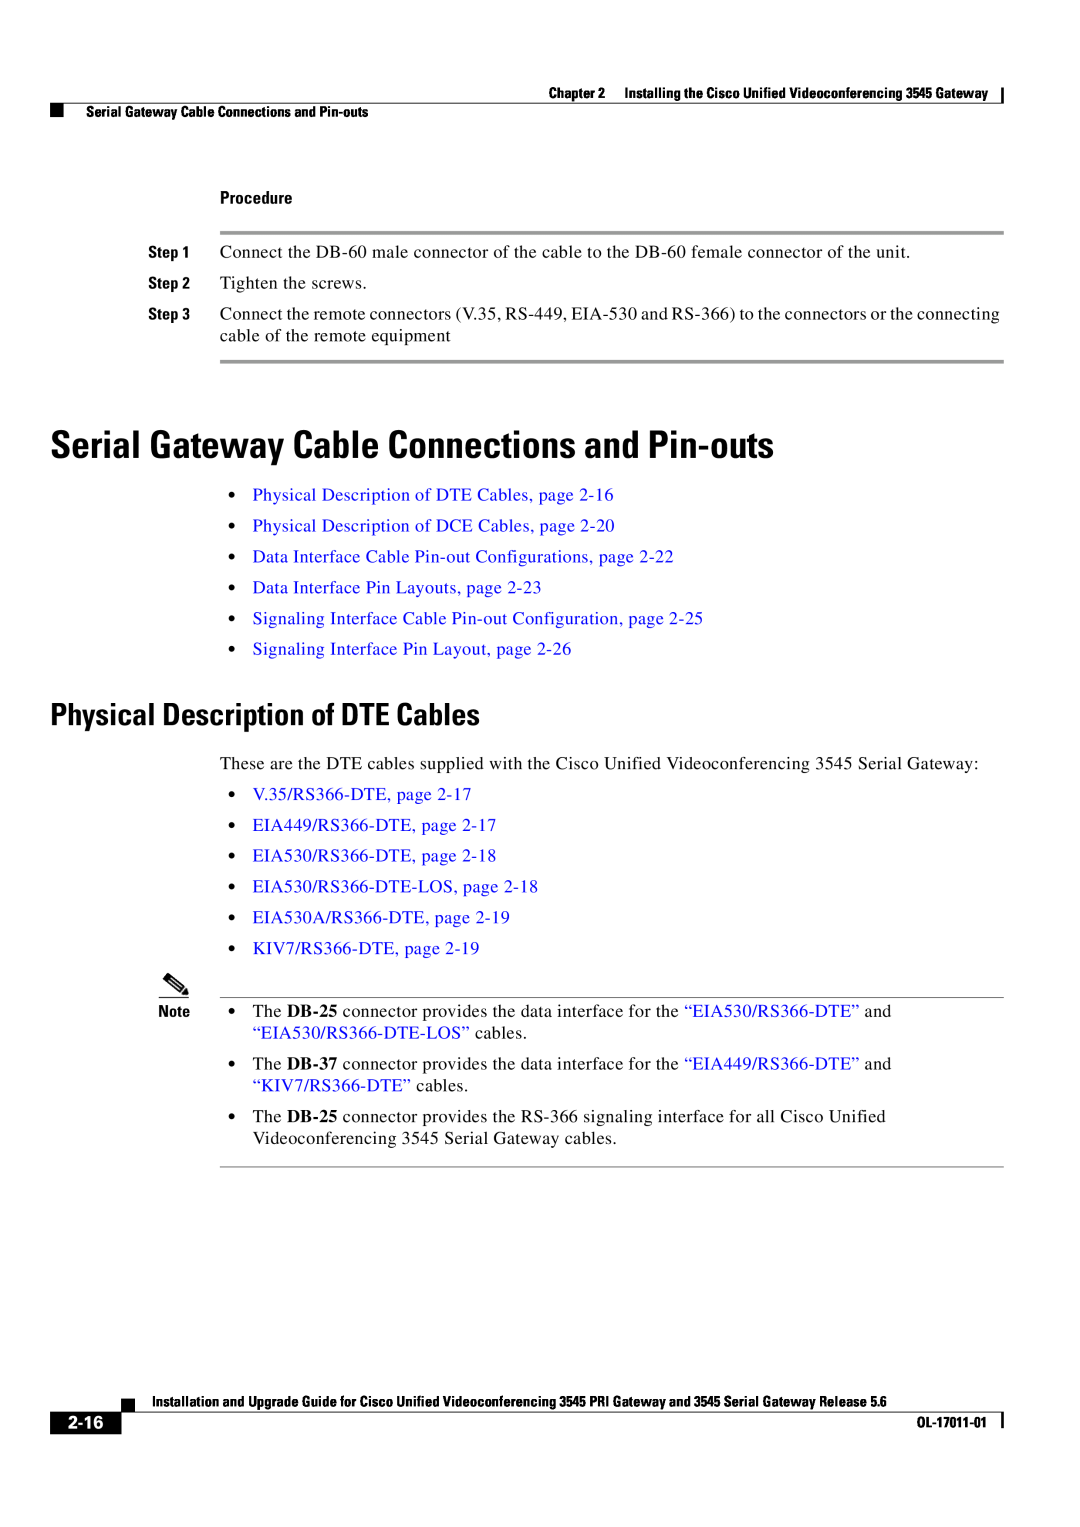 Cisco Systems 3545 PRI Serial Gateway Cable Connections and Pin-outs, Physical Description of DTE Cables, 2-16, Procedure 